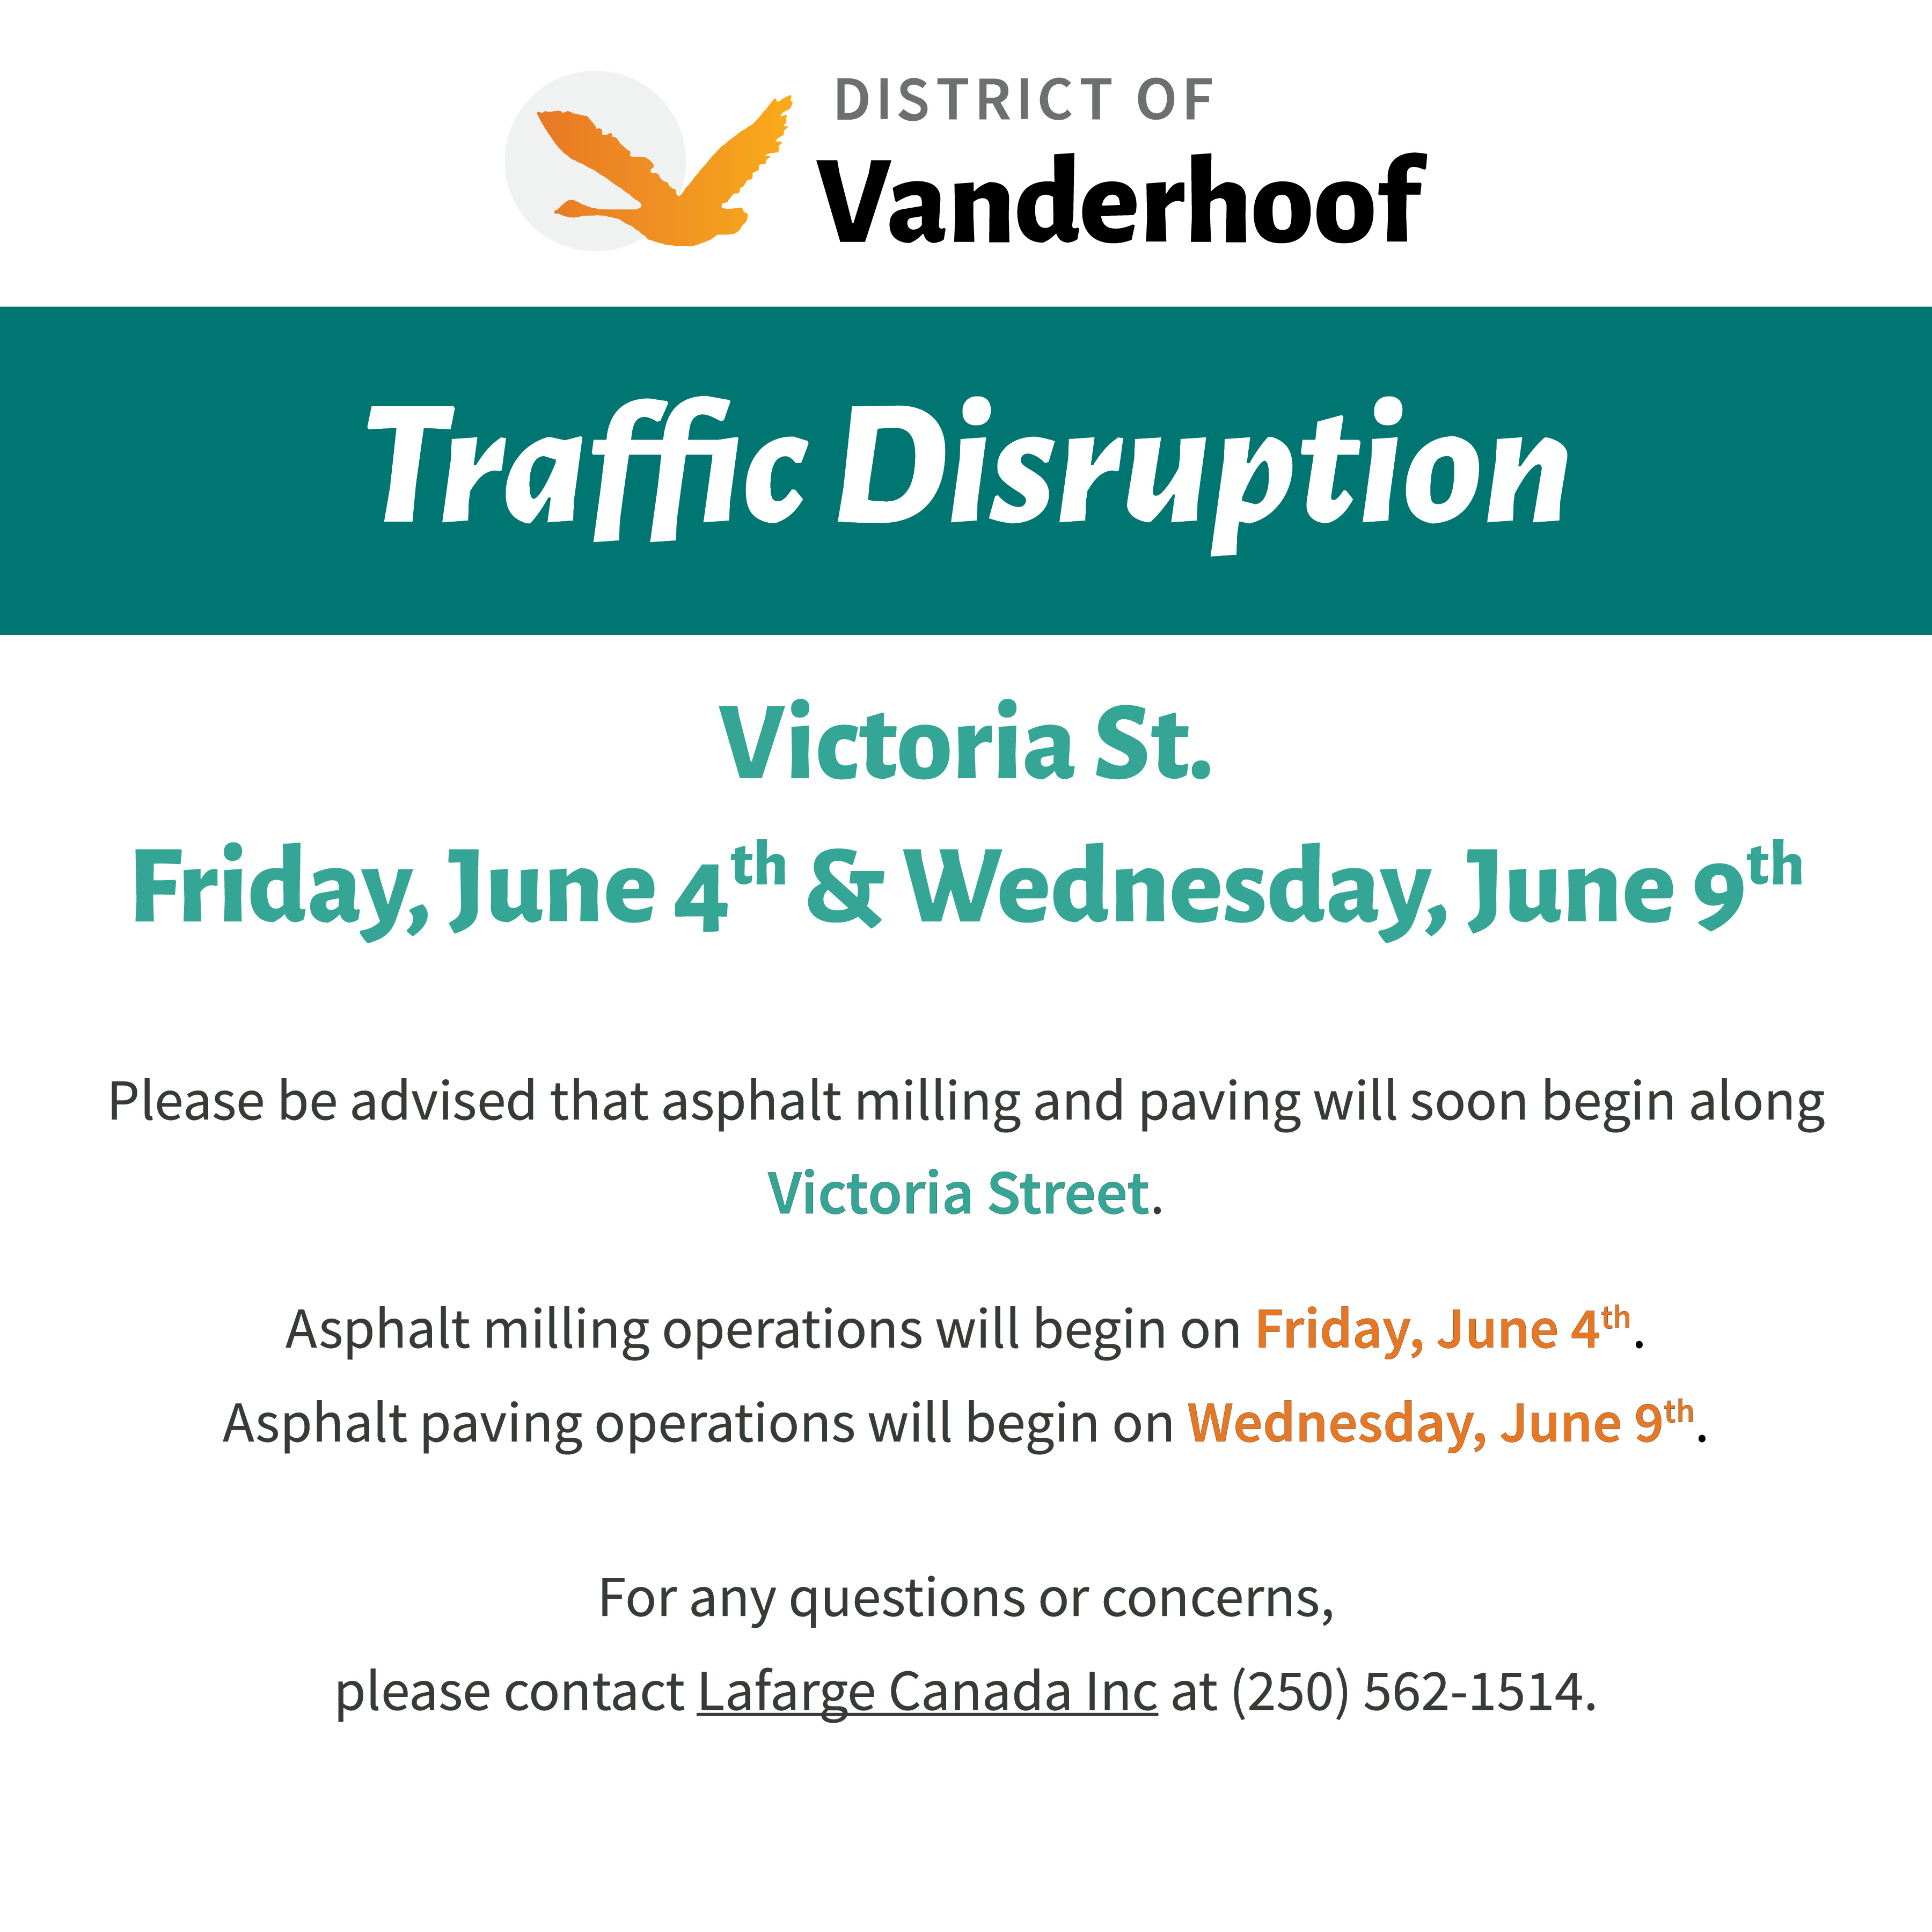 Please be advised that asphalt milling and paving will soon begin along Victoria Street. Asphalt milling operations will begin on Friday, June 4th. Asphalt paving operations will begin on Wednesday, June 9th. For any questions or concerns,  please contact Lafarge Canada Inc at (250) 562-1514.